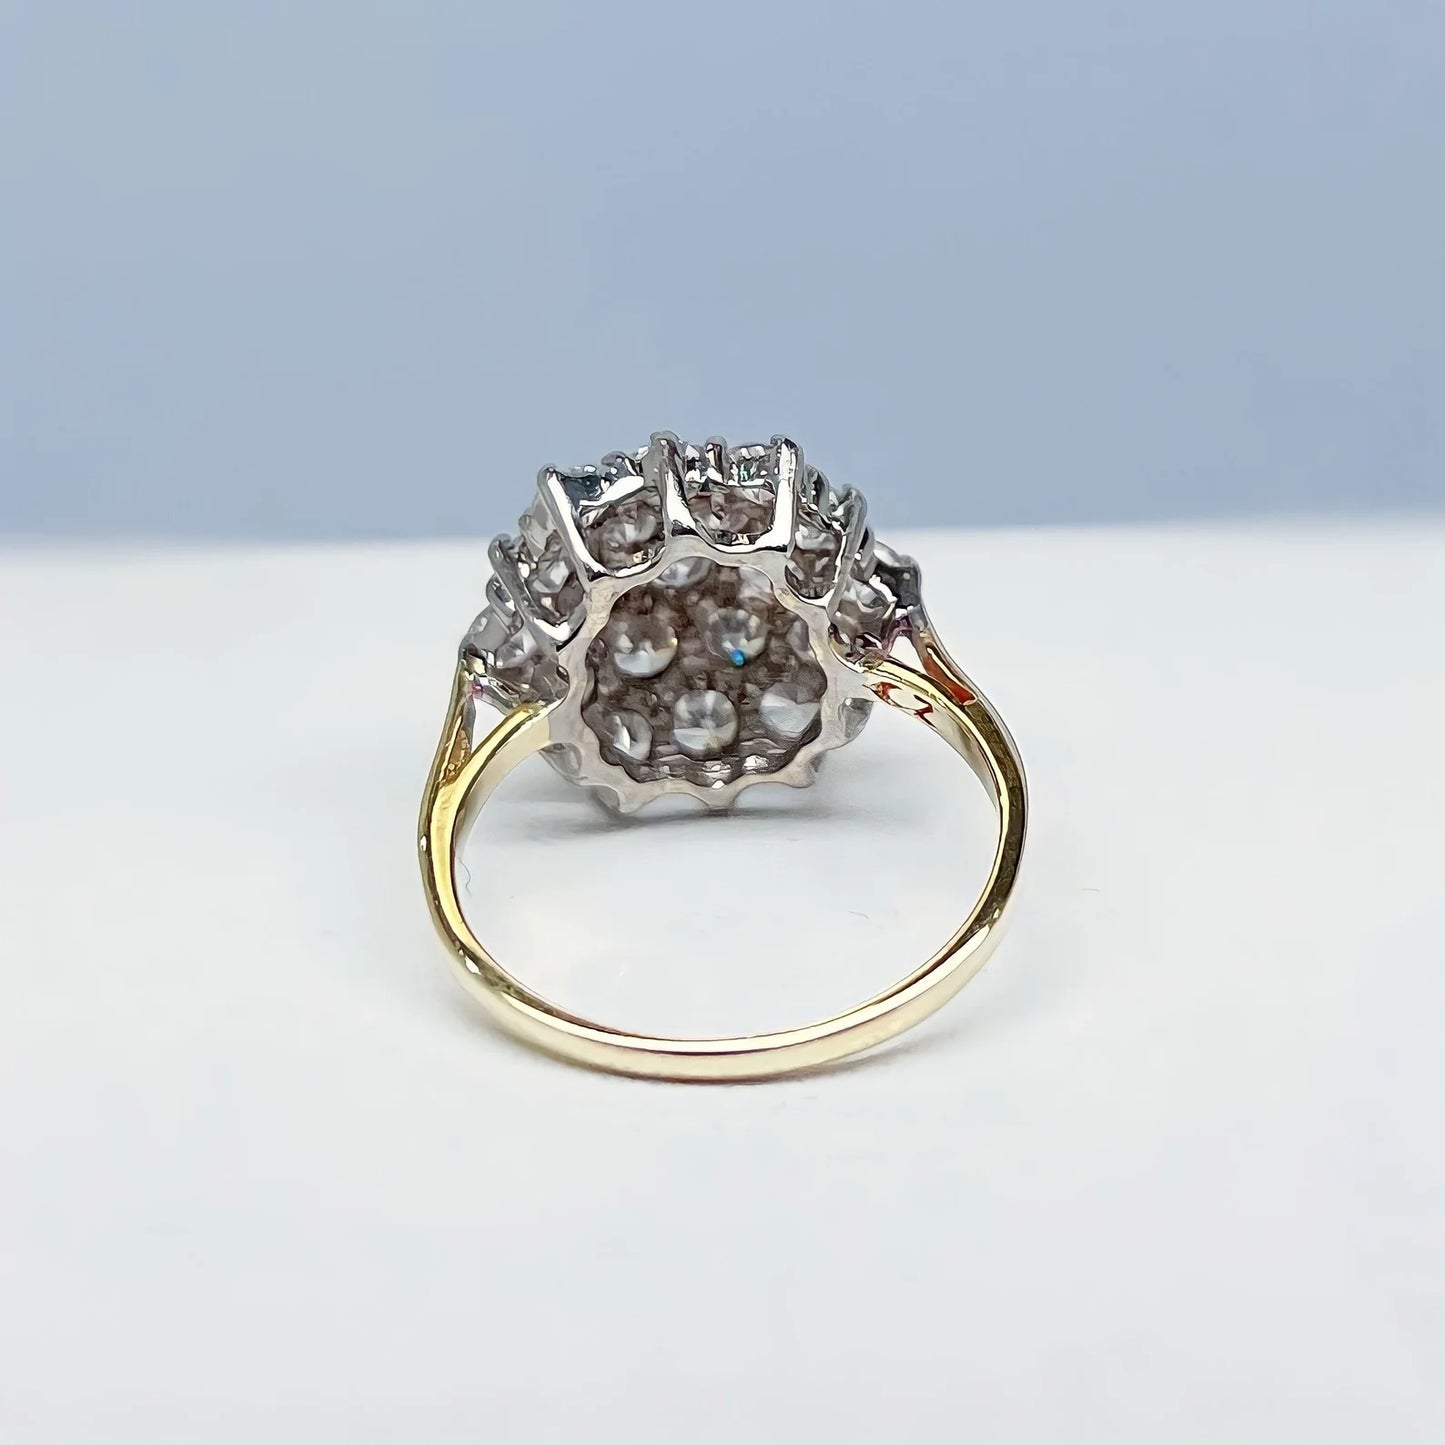 Vintage 9ct Gold Cubic Zirconia Cluster Ring - Size M